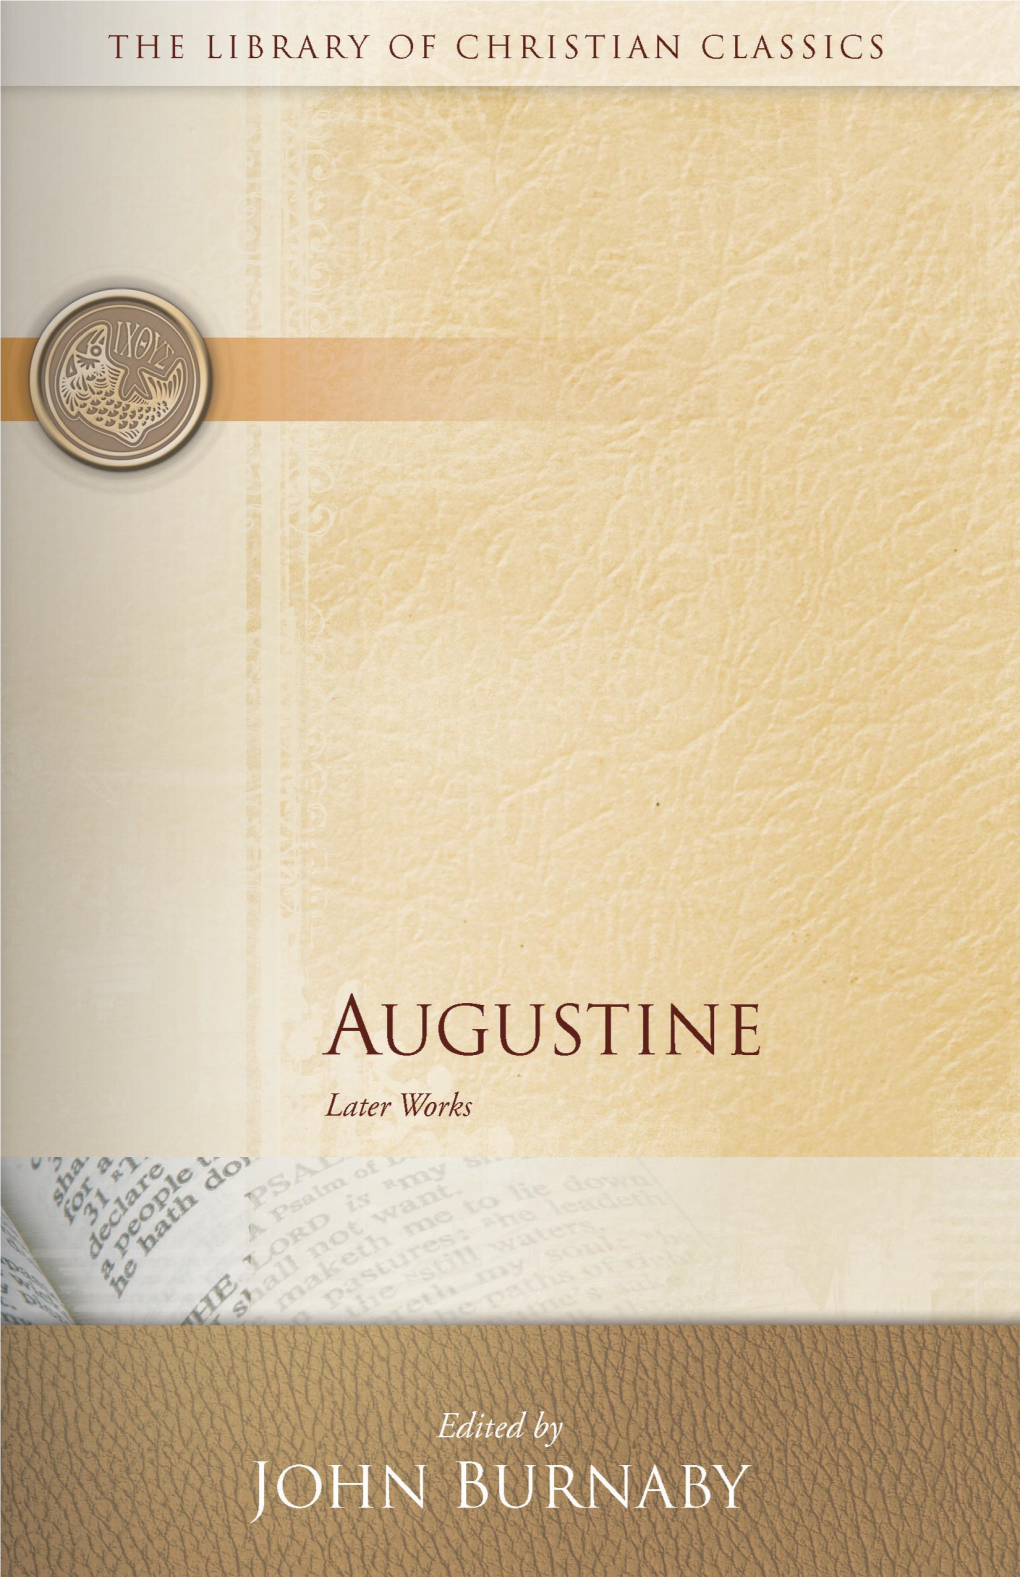 Augustine: Later Works, Might More Properly Be Applied to the Writings in Which This System Was Worked out After the Condemnation of Pelagianism in 418